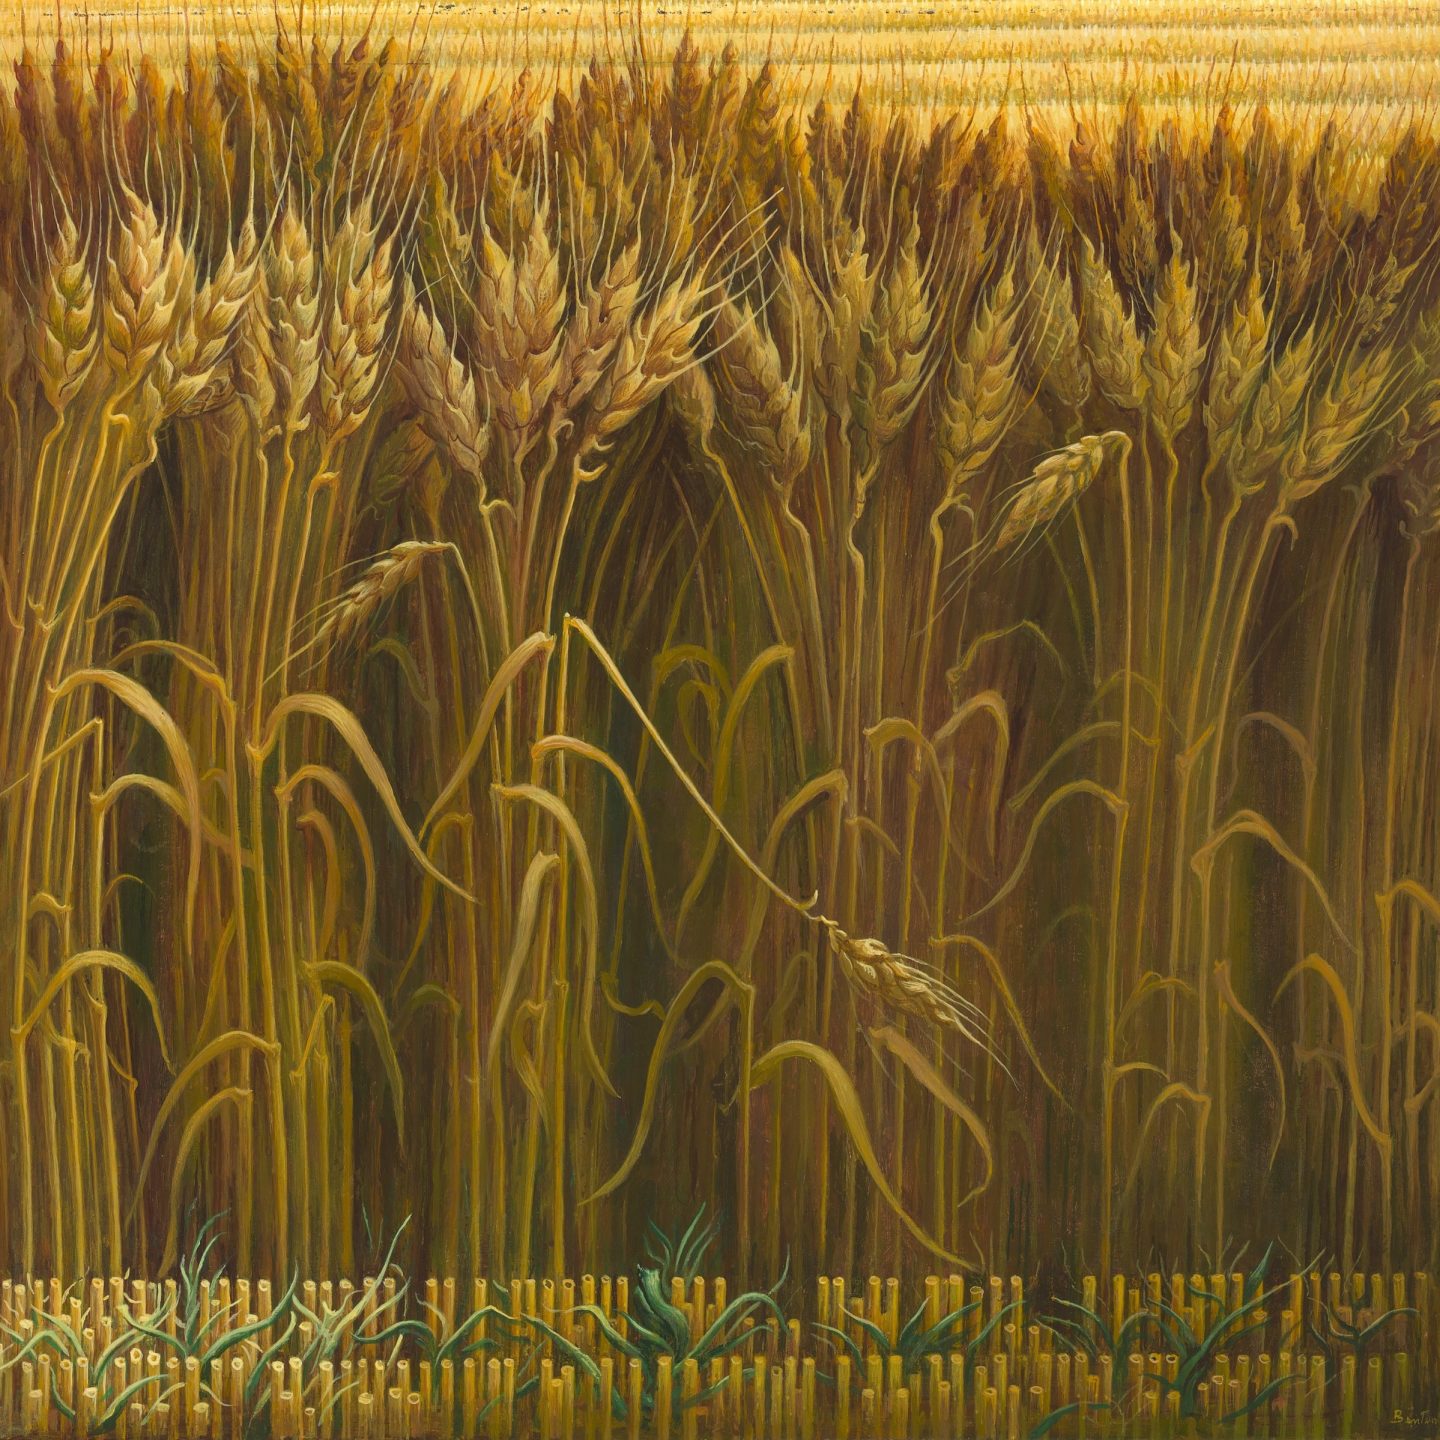 As Wheat Gathered by the Lord